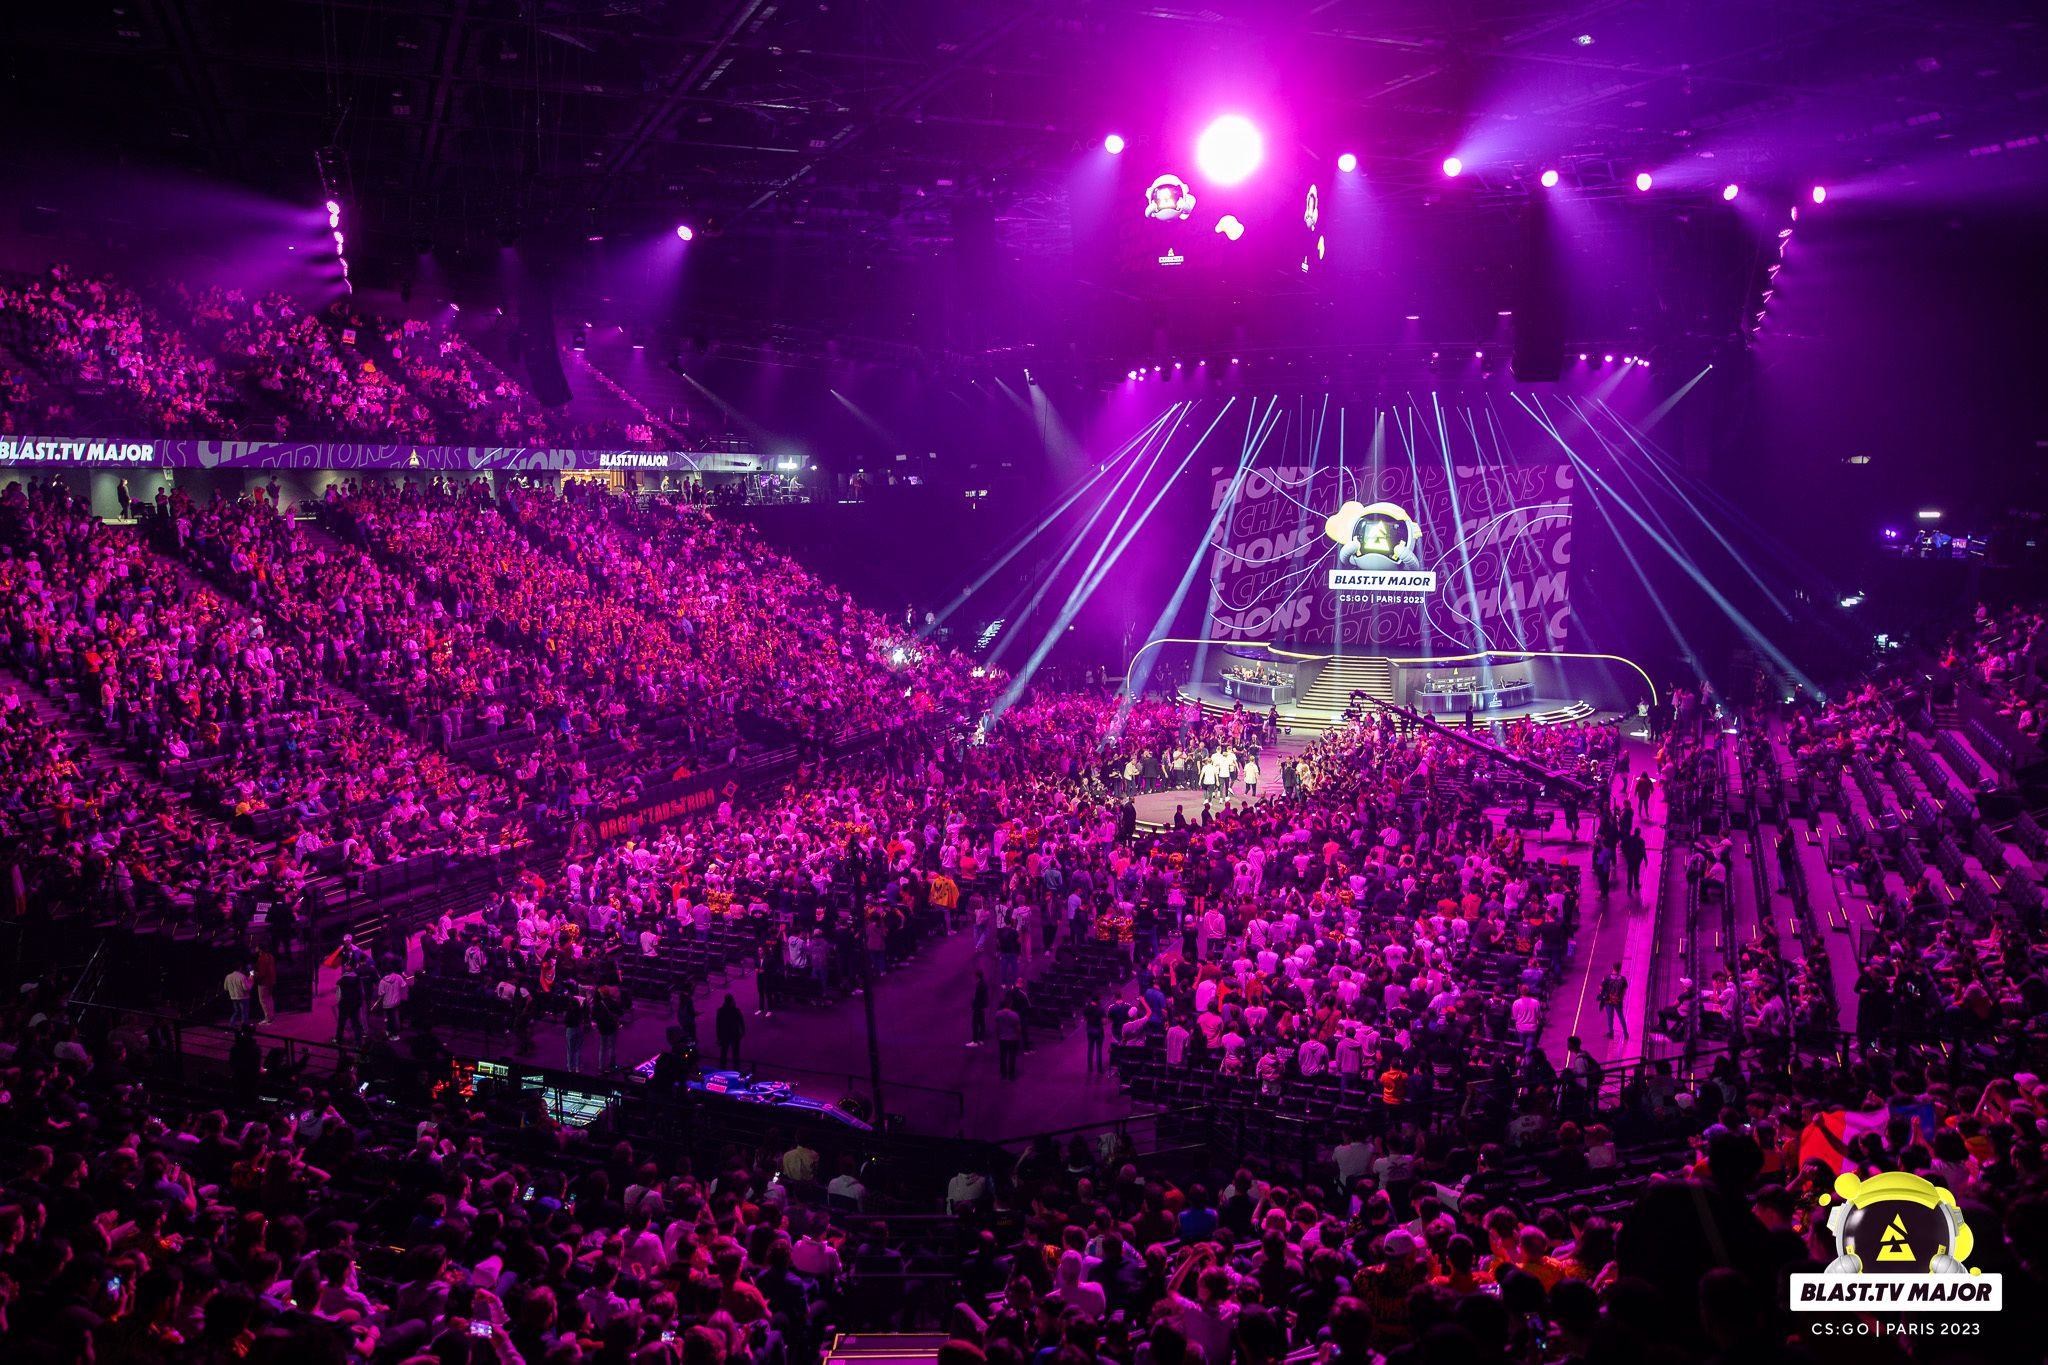 Paris Major to be first CS event to feature live on TikTok